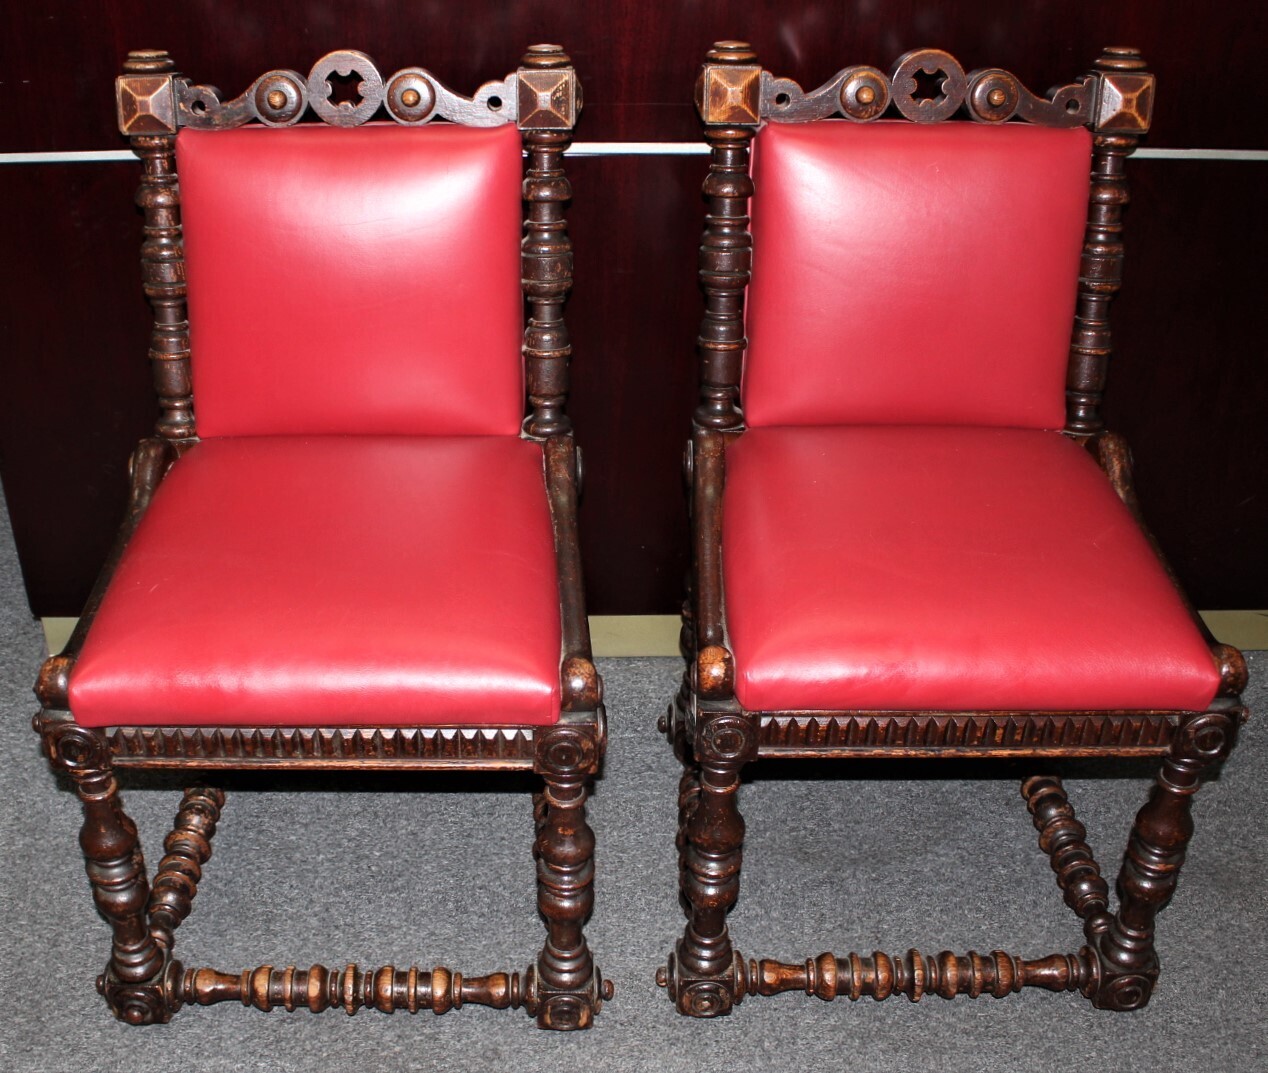 Pair of Renaissance Revival Carved Oak Red Leather Upholstered Chairs on Casters